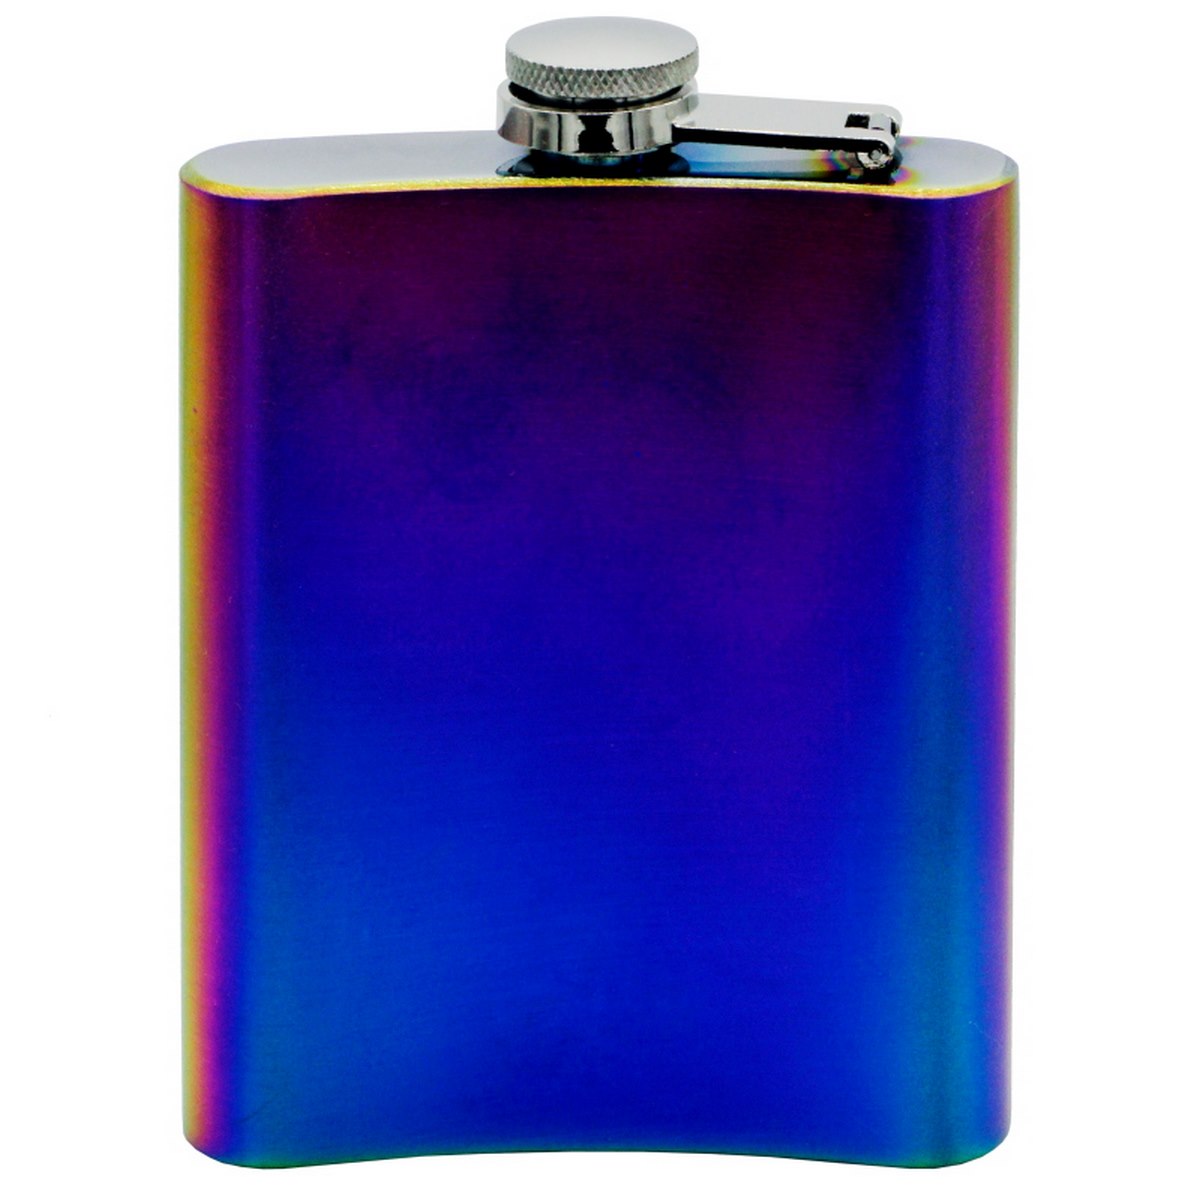 Rainbow Stainless Steel Hip Flask 8oz - For Corporate Gifting, Return Gift, Personal Use JA80ZMC